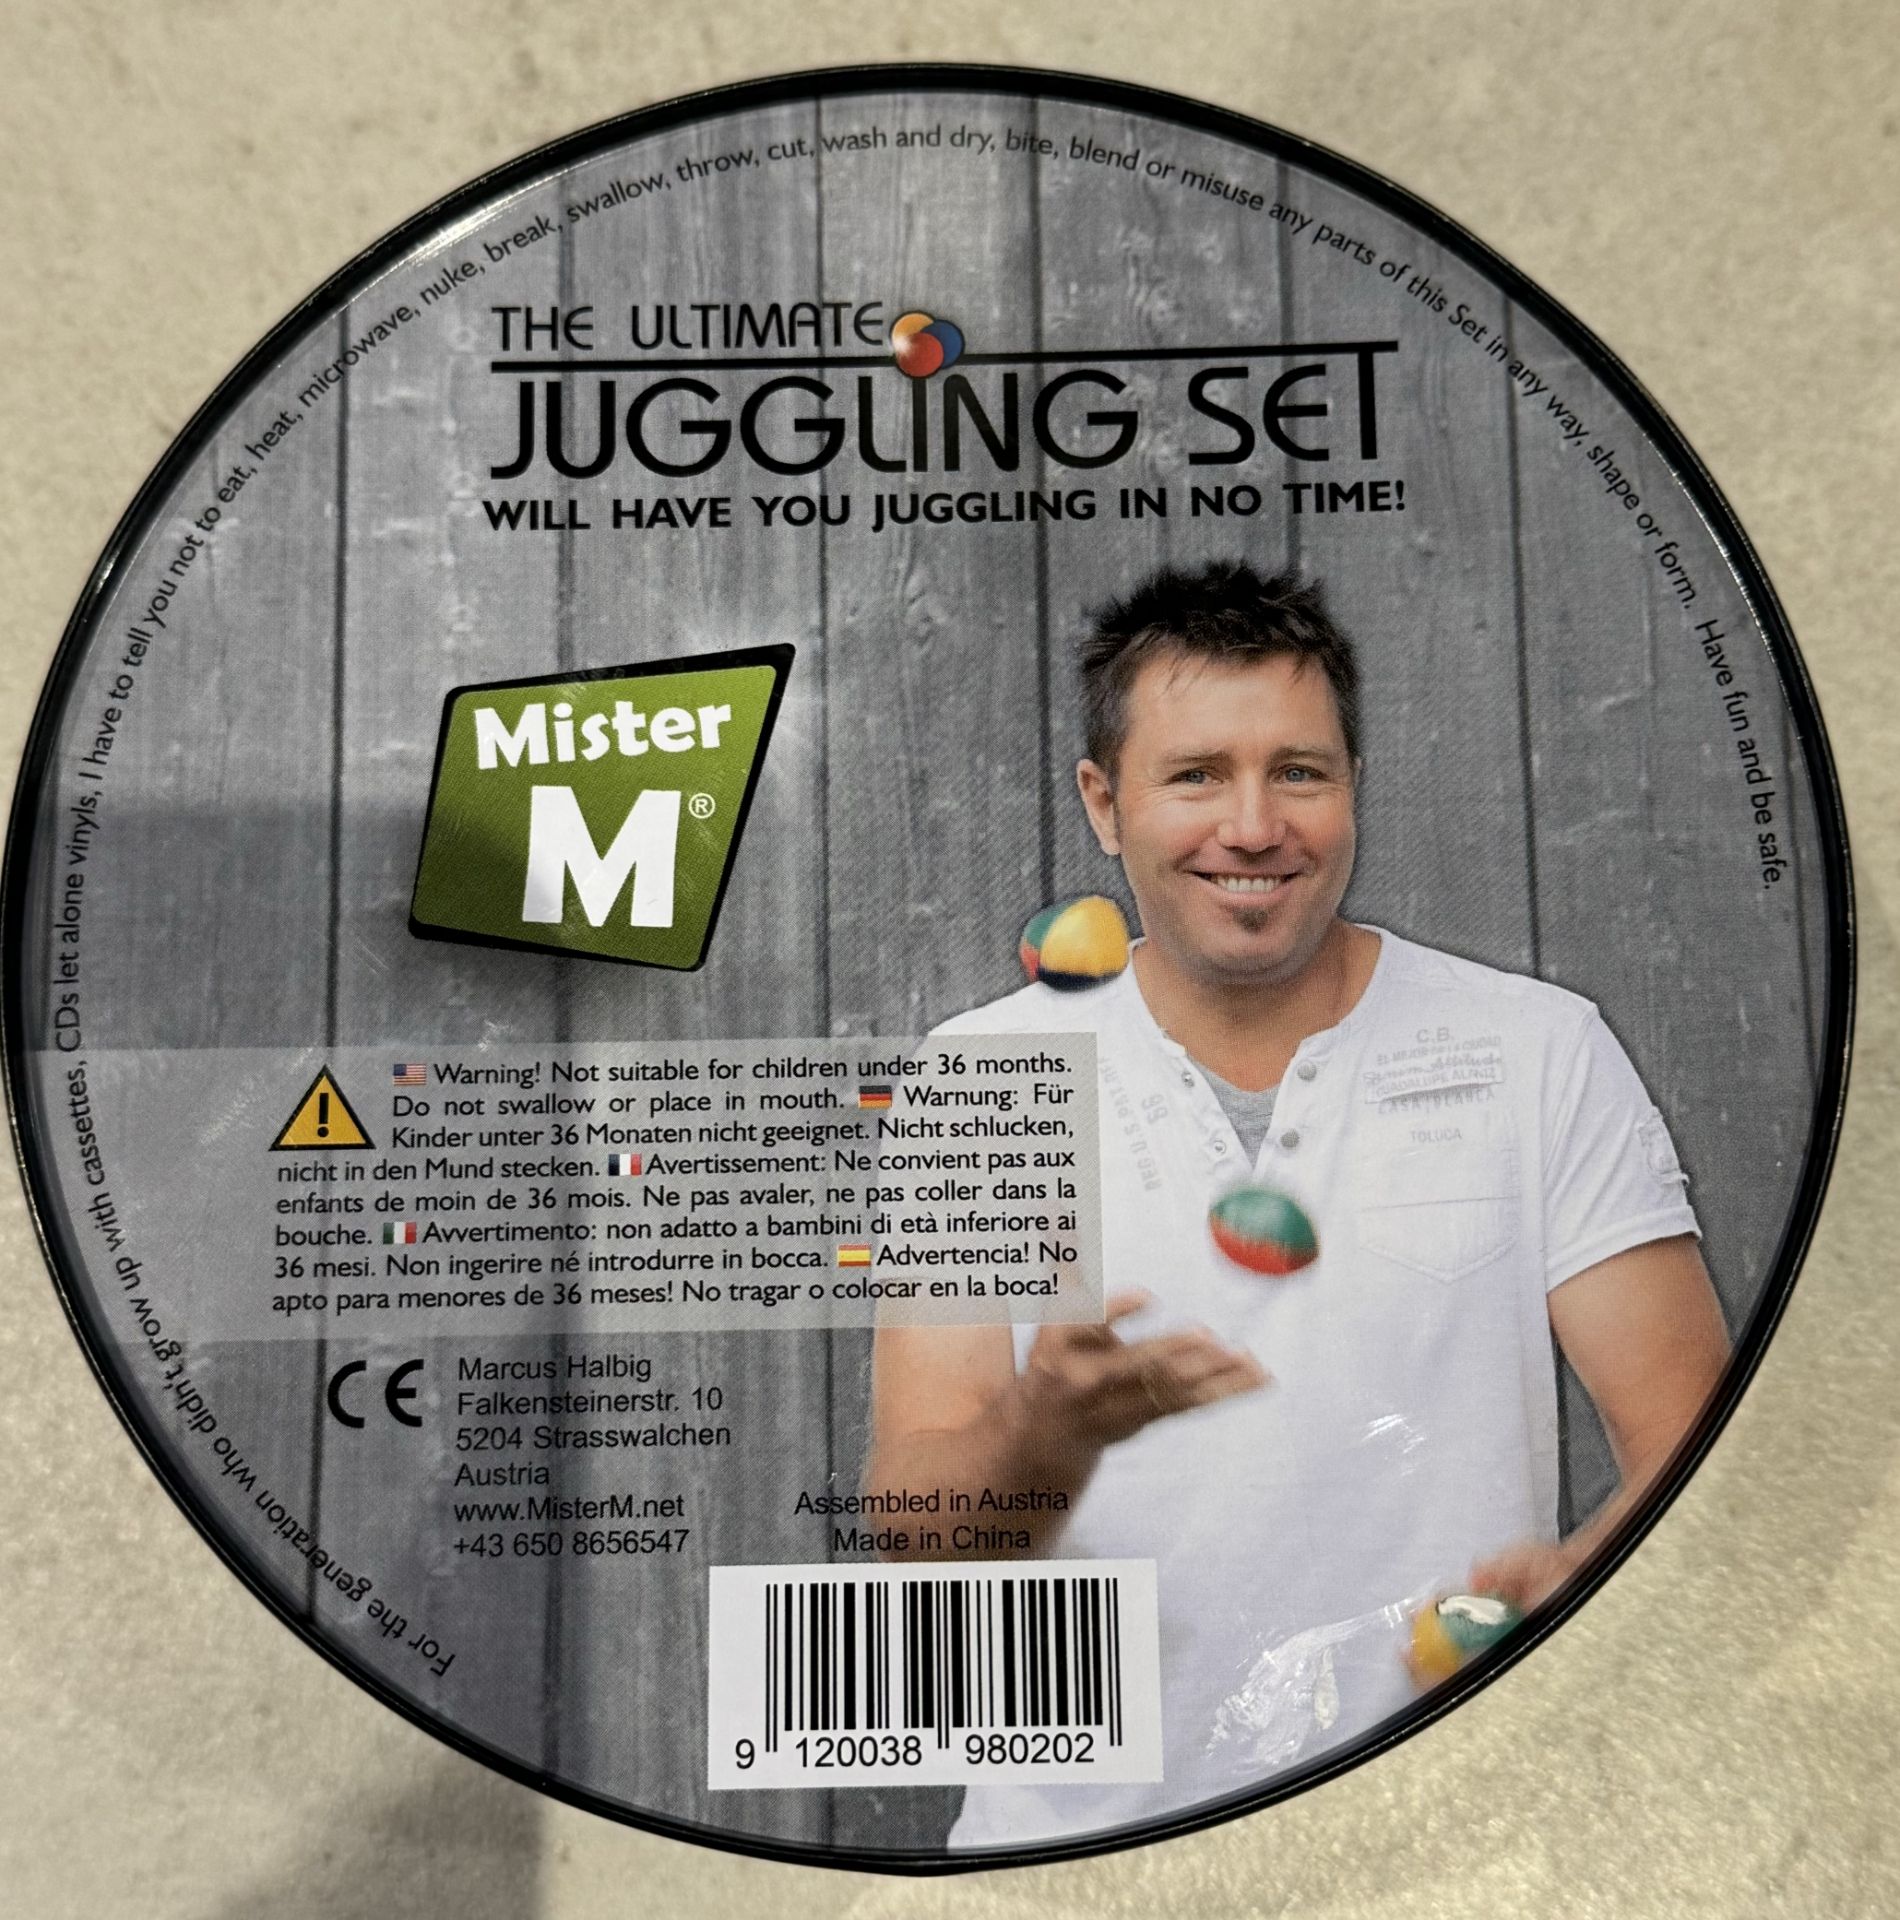 3 Ball 'Mister Mae' Juggling Set with Instruction Download QR in Metal Tin - New - Image 3 of 3